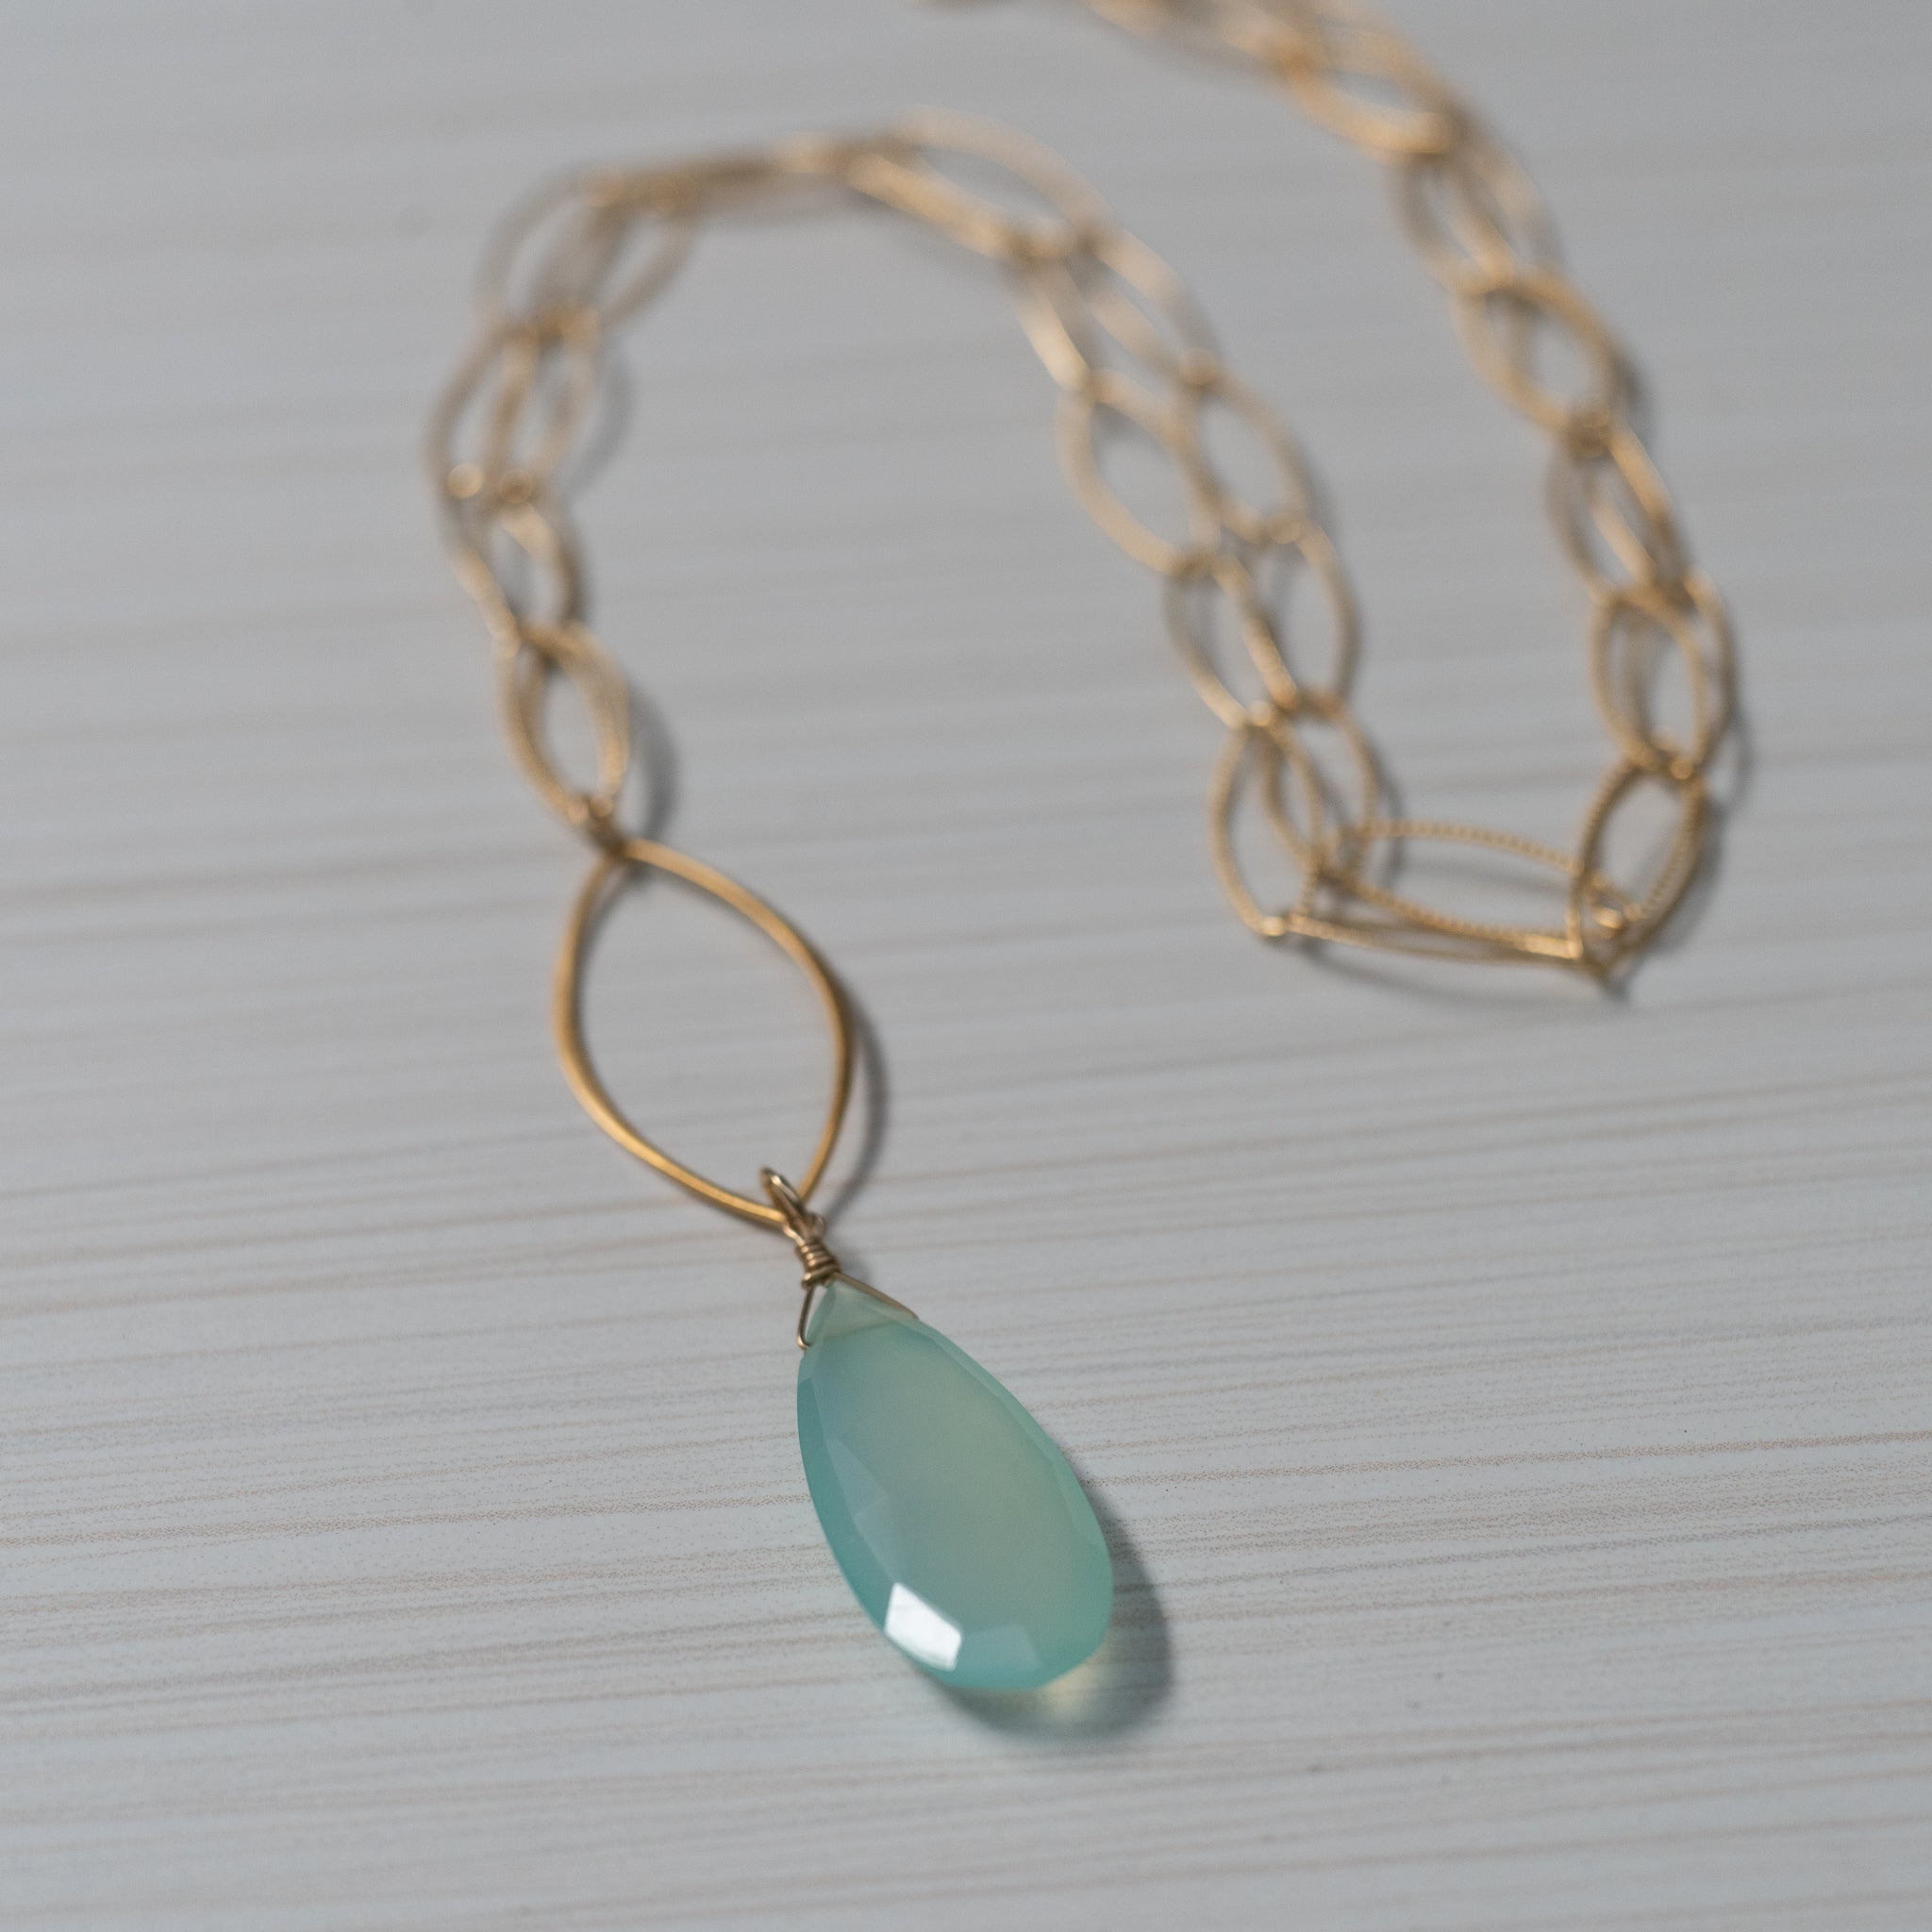 blue gemstone gold necklace handmade in Hawaii by eve black jewelry  Edit alt text